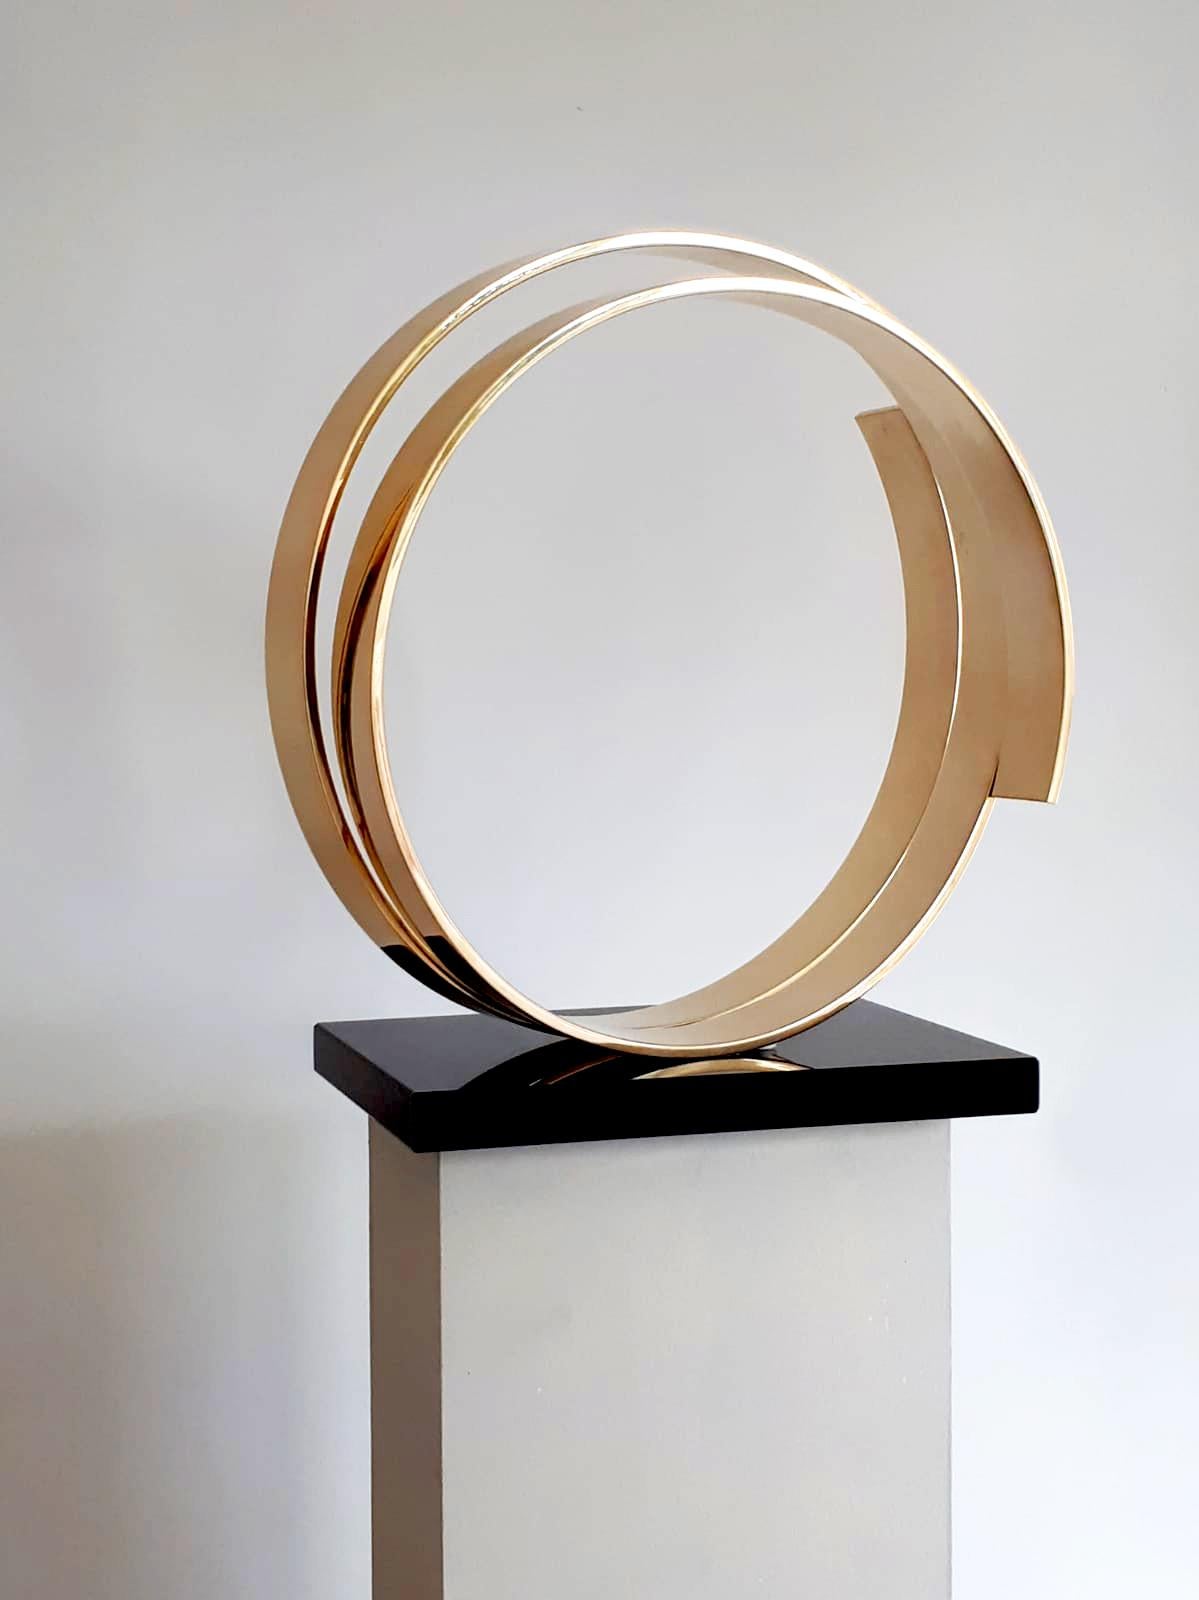 Beautiful polished bronze to a light golden color. This stunning contemporary sculpture is a timeless and elegant piece. Circular lines are shaping the shiny metal into an abstract artwork like no other.

About the Gallery:
Folly and Muse was